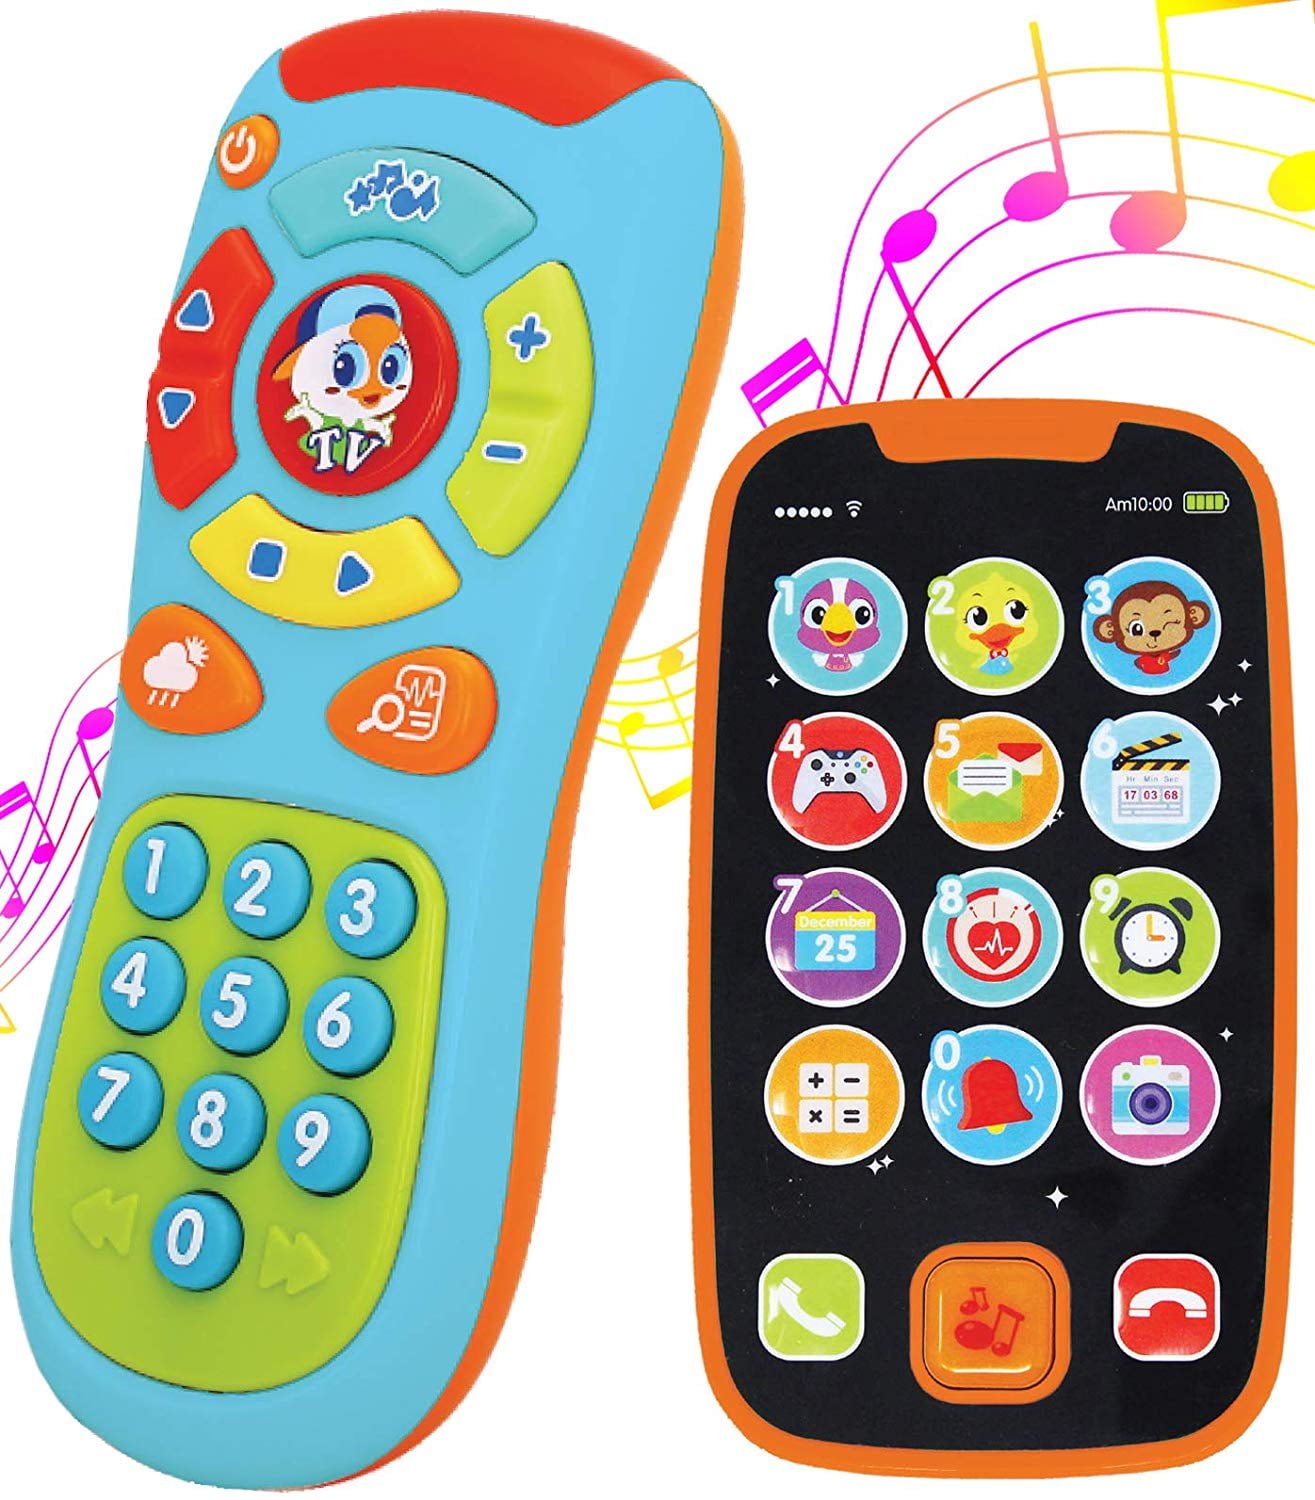 Play Phones For Toddlers Remote and Phone Bundle with Music, Fun, Smartphone Toys for Baby, Infants, Kids, Boys or Girls Birthday Gifts